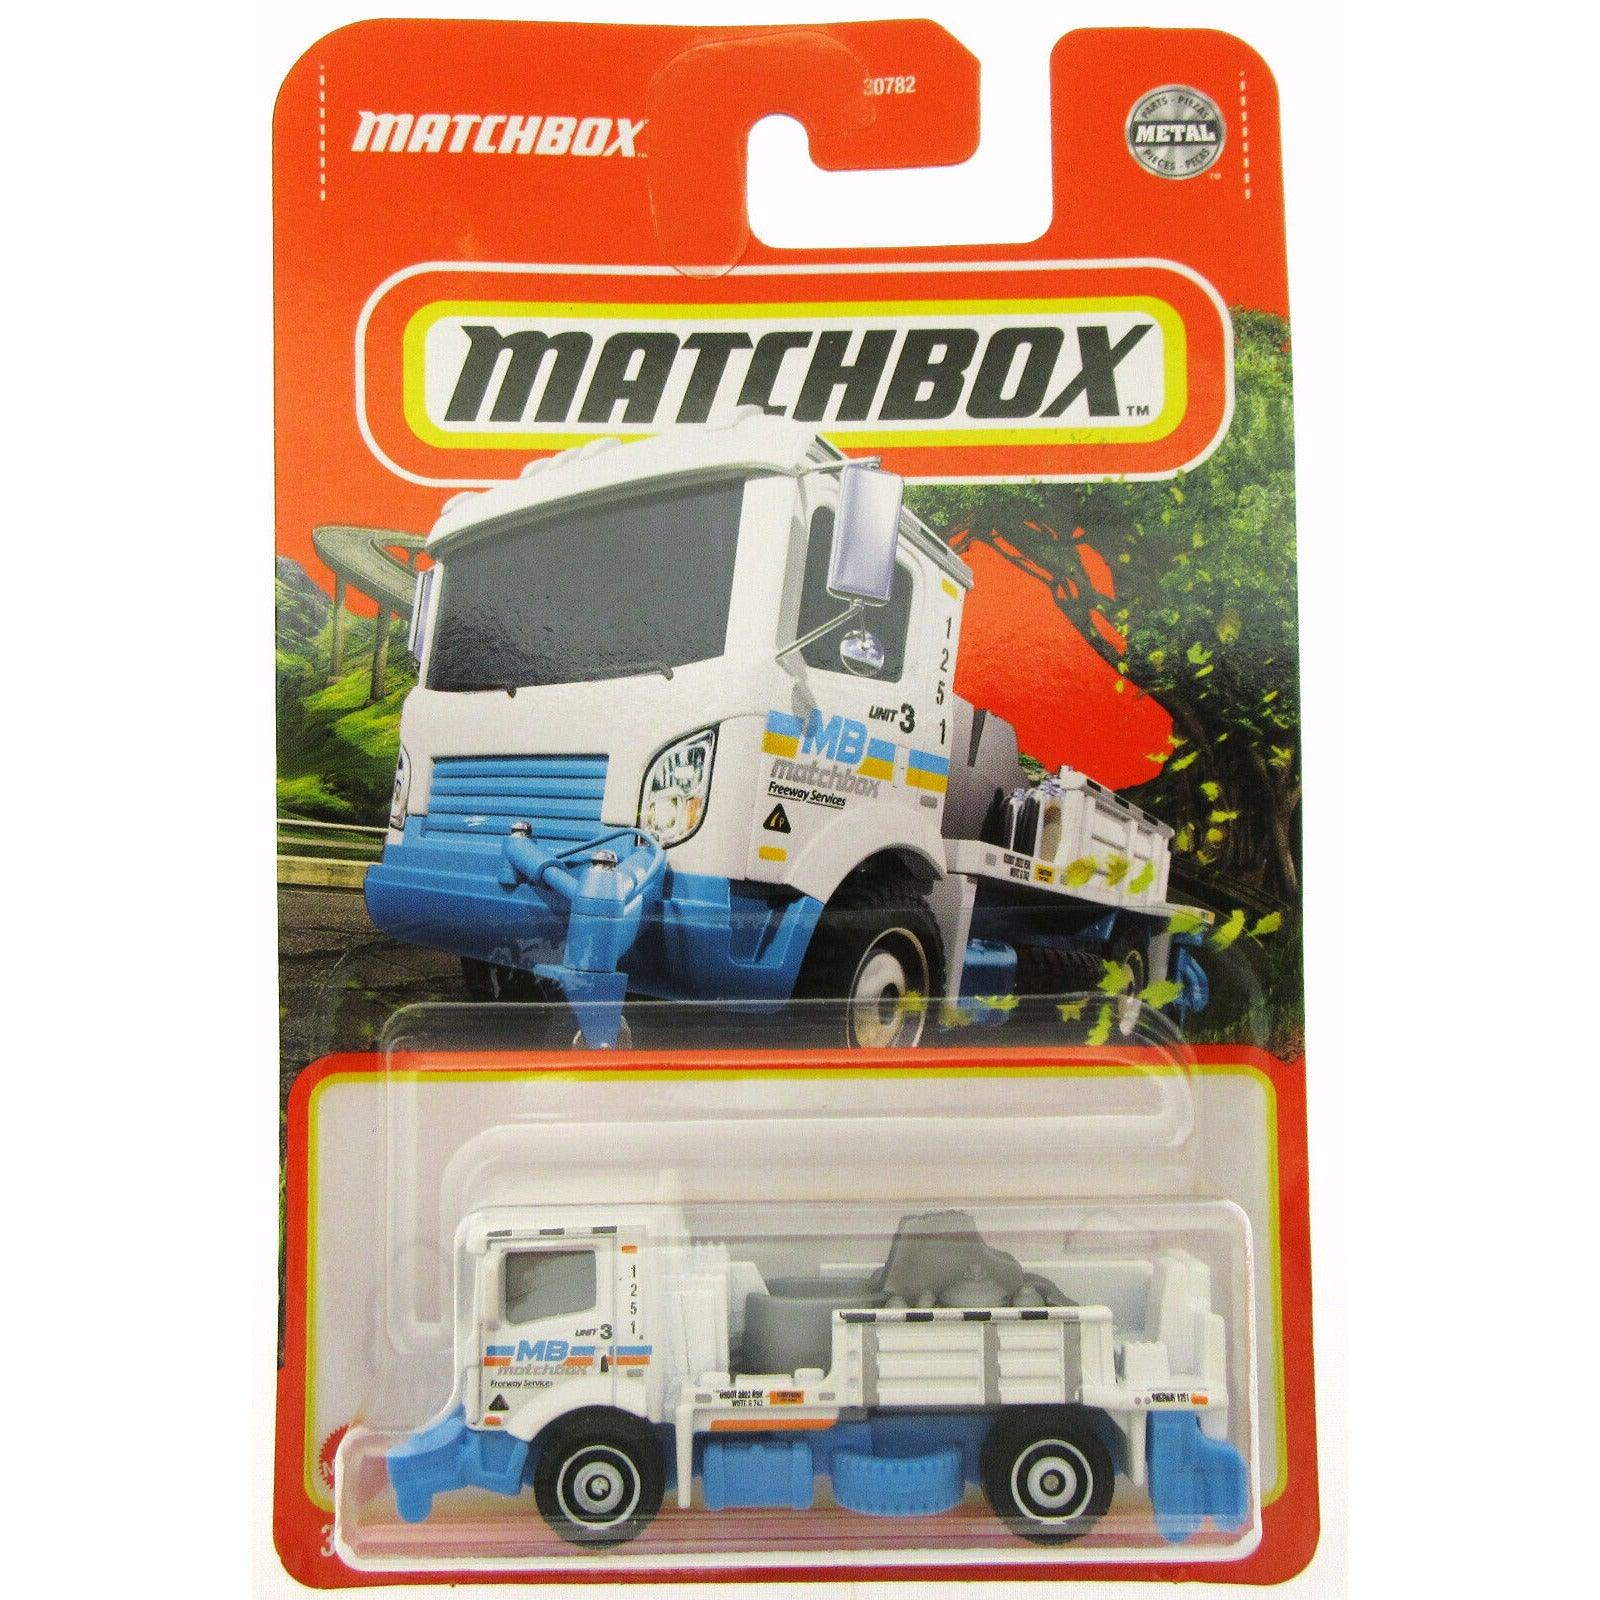 MatchBox Die Cast 1:64 Scale Vehicle - Road Stripe King (White) - BumbleToys - 2-4 Years, 5-7 Years, Boys, Collectible Vehicles, MatchBox